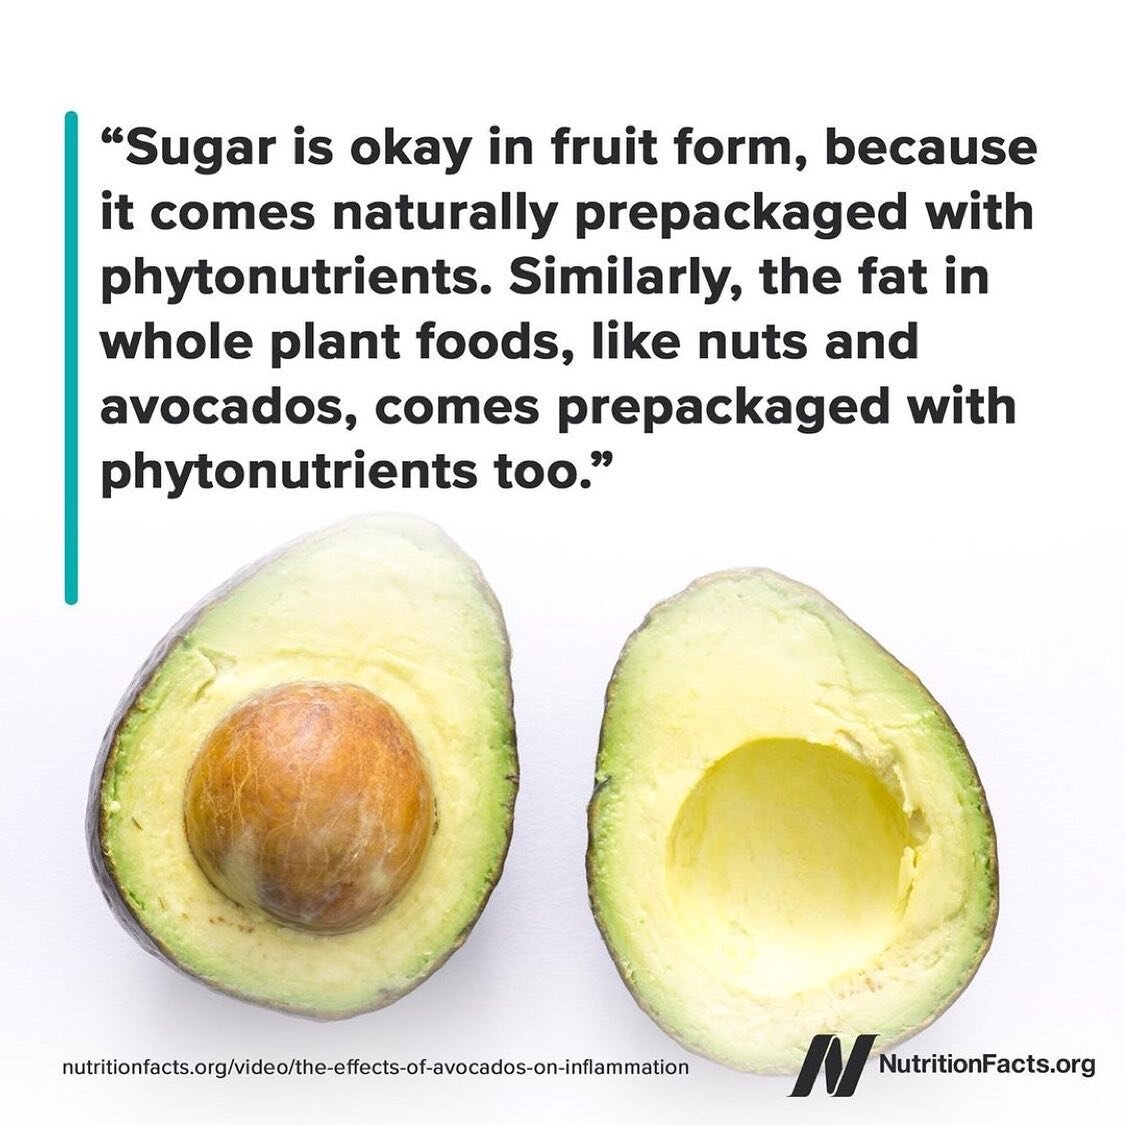 Facts. Look to the plants, my friends. It&rsquo;s all about the plants. 💚💚💚💚

Repost from @nutrition_facts_org
&bull;
The effects of avocados on inflammation: http://bit.ly/2Mne3gy⁠
⁠
Download our free Daily Dozen app today and start including so